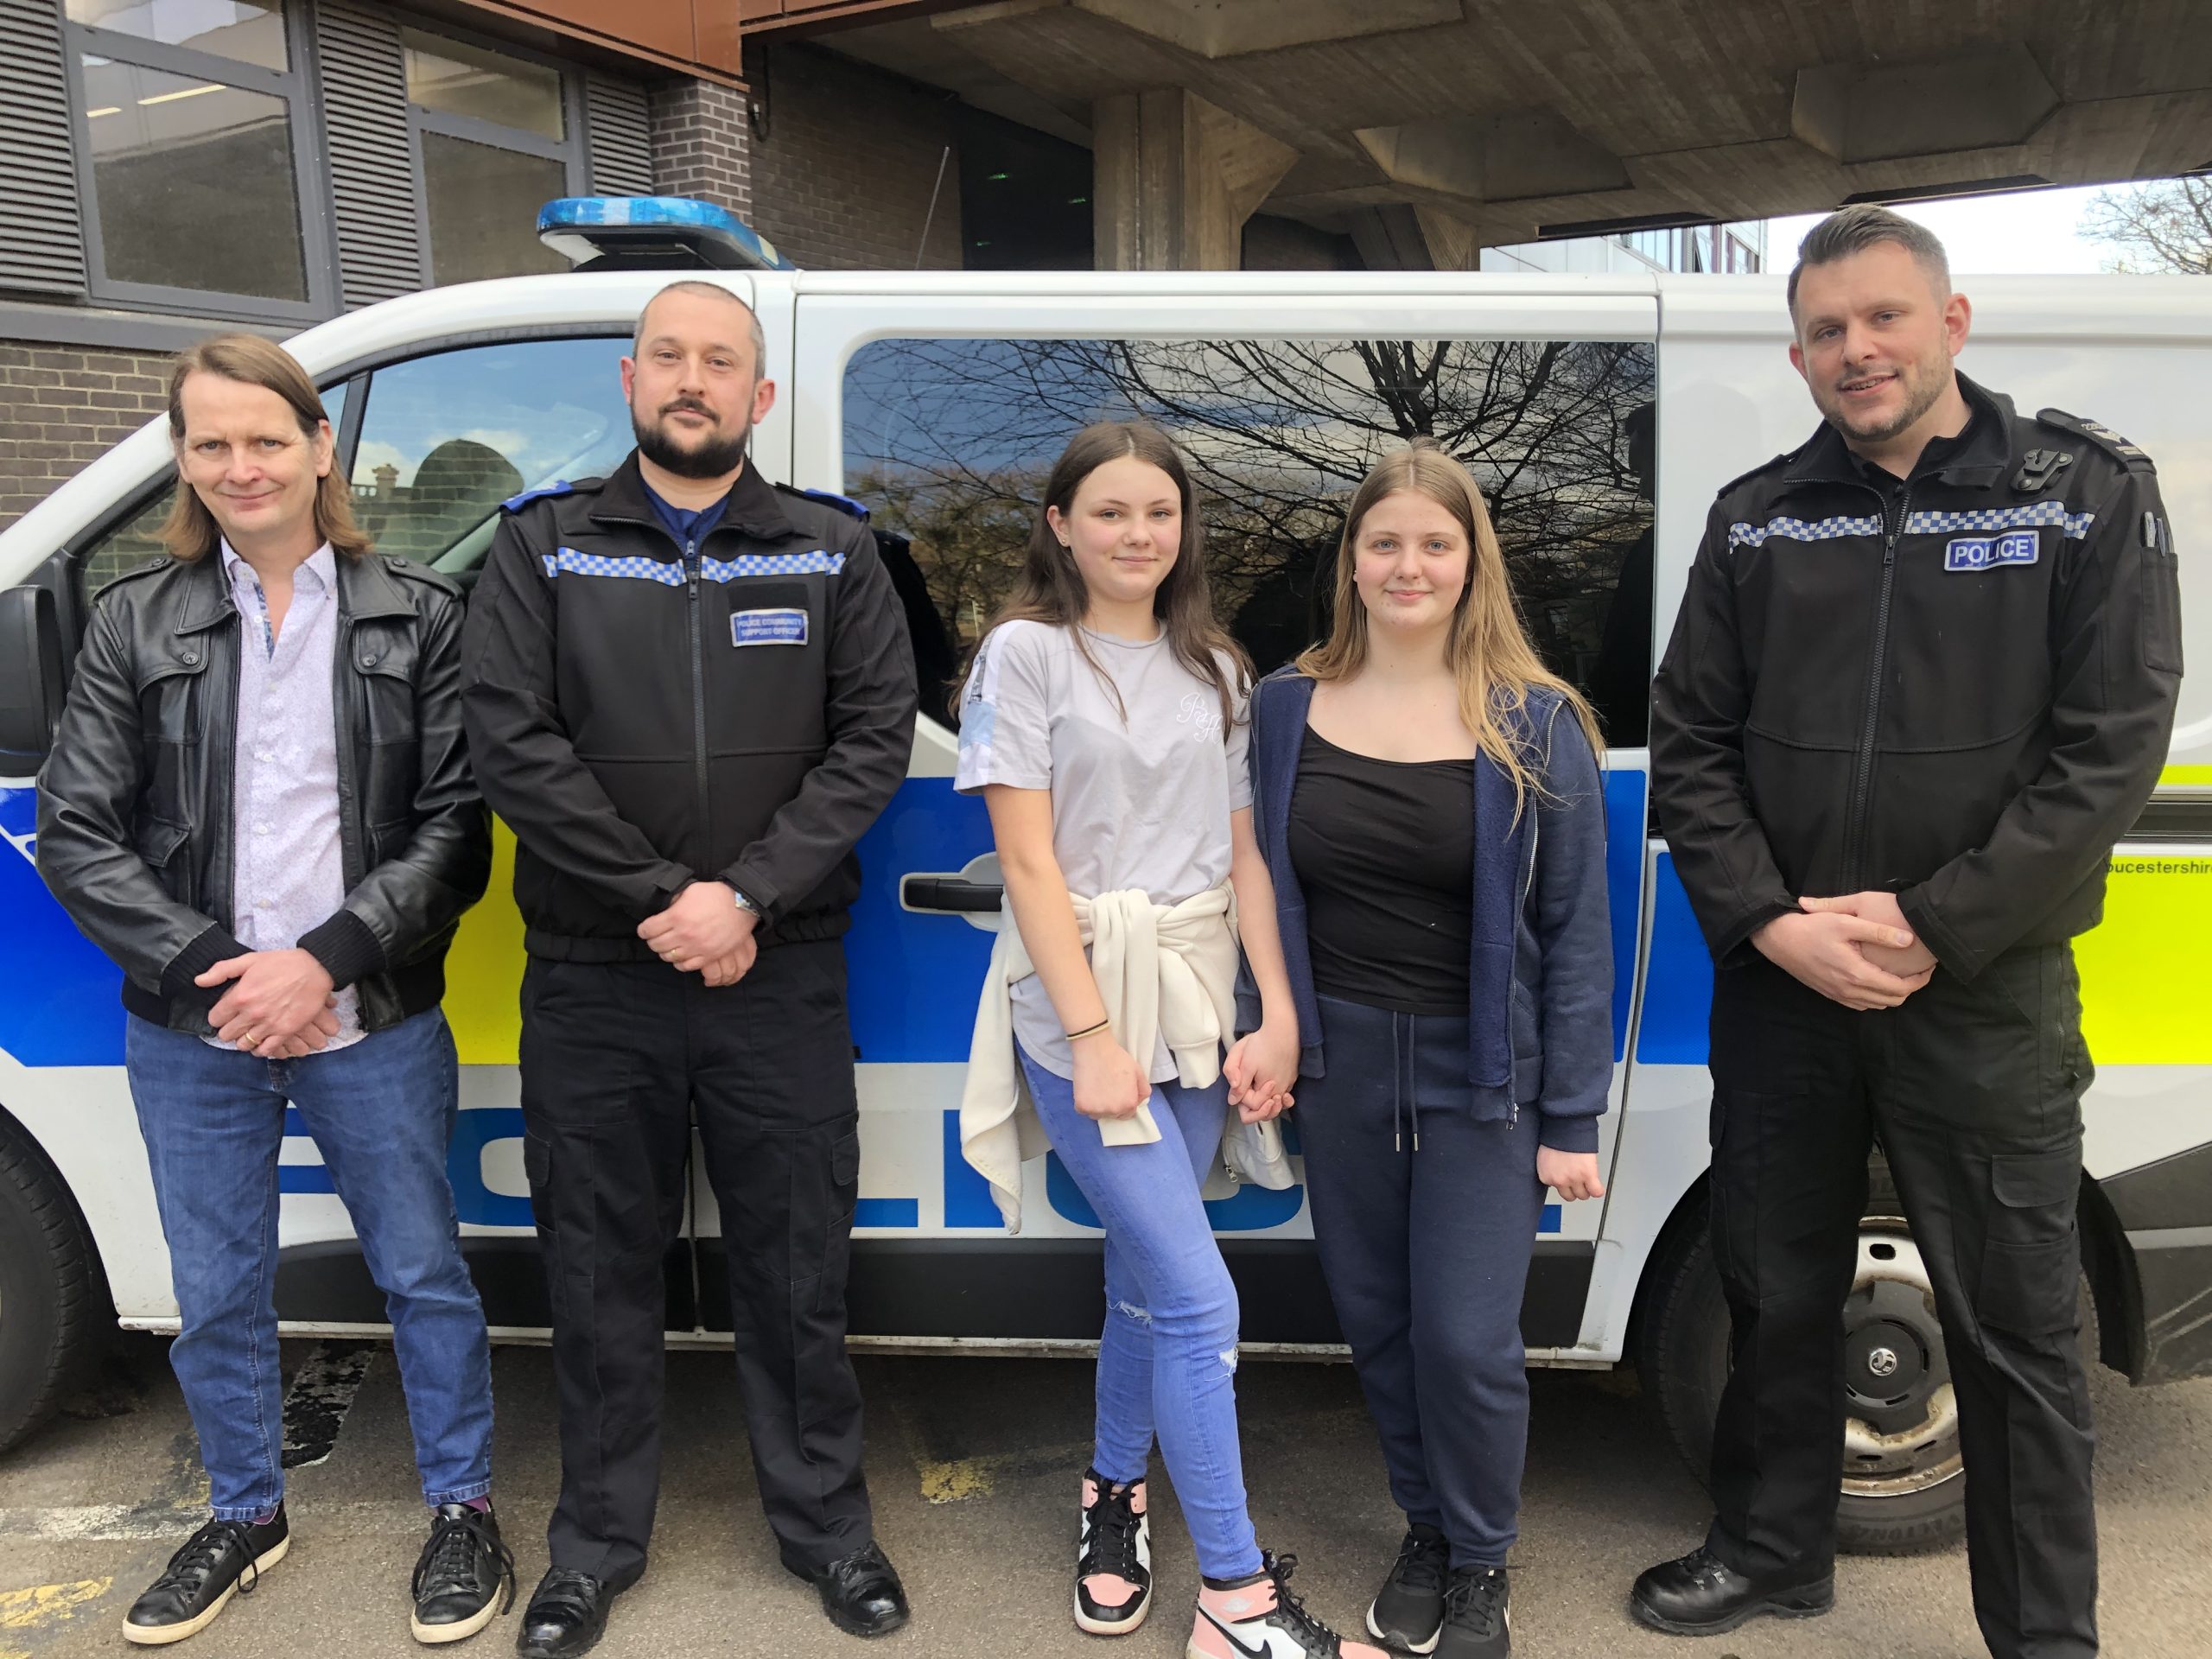 NEWS | Police officers are reunited with young girl whose life they saved after her heart stopped beating